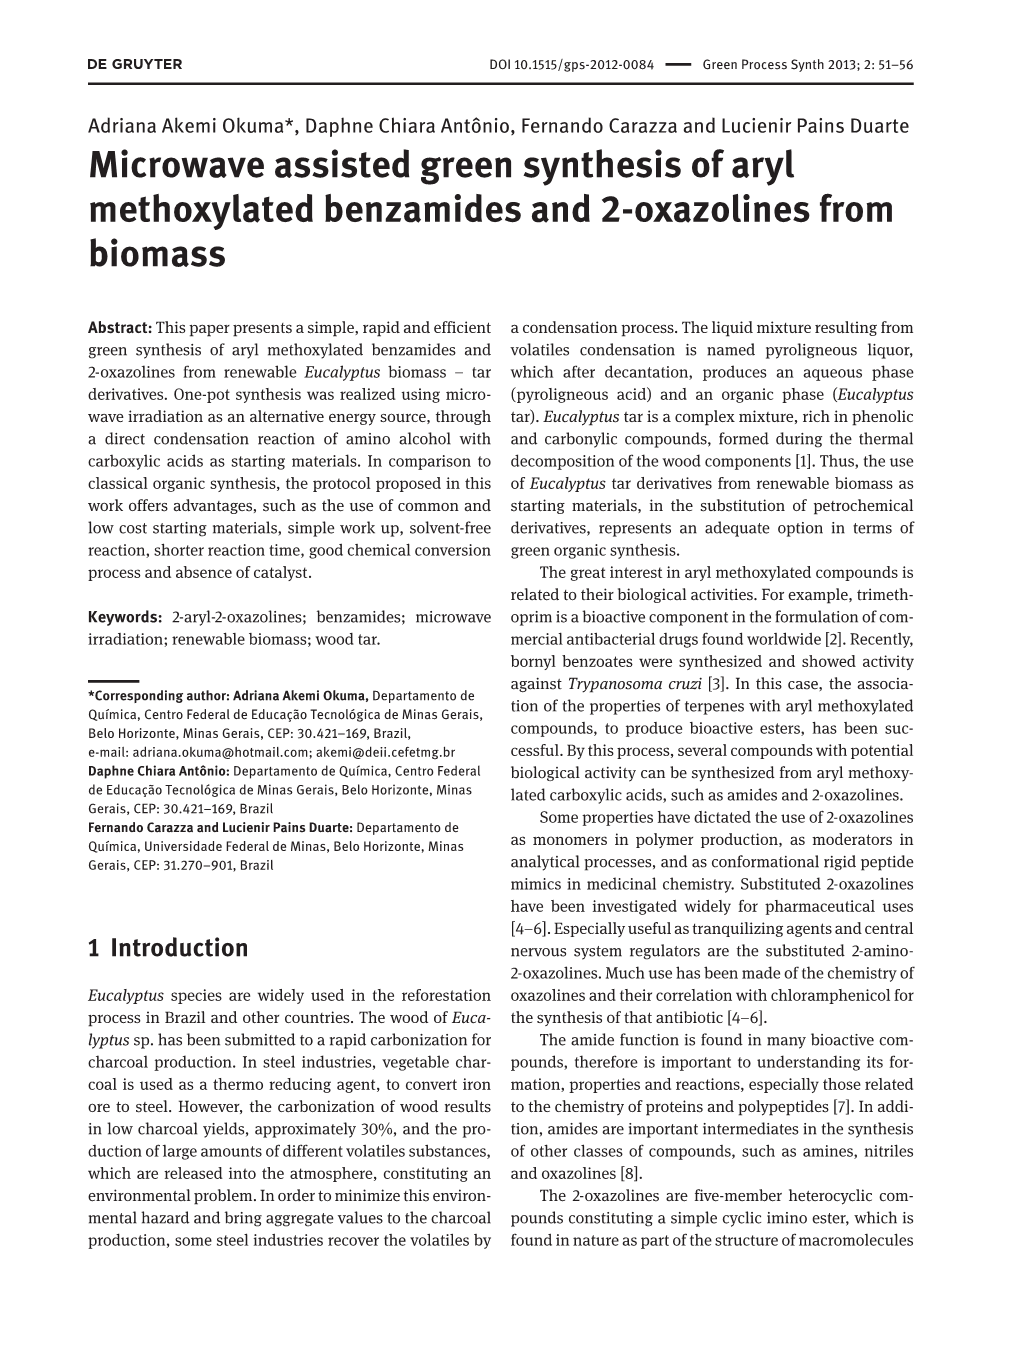 Microwave Assisted Green Synthesis of Aryl Methoxylated Benzamides and 2-Oxazolines from Biomass